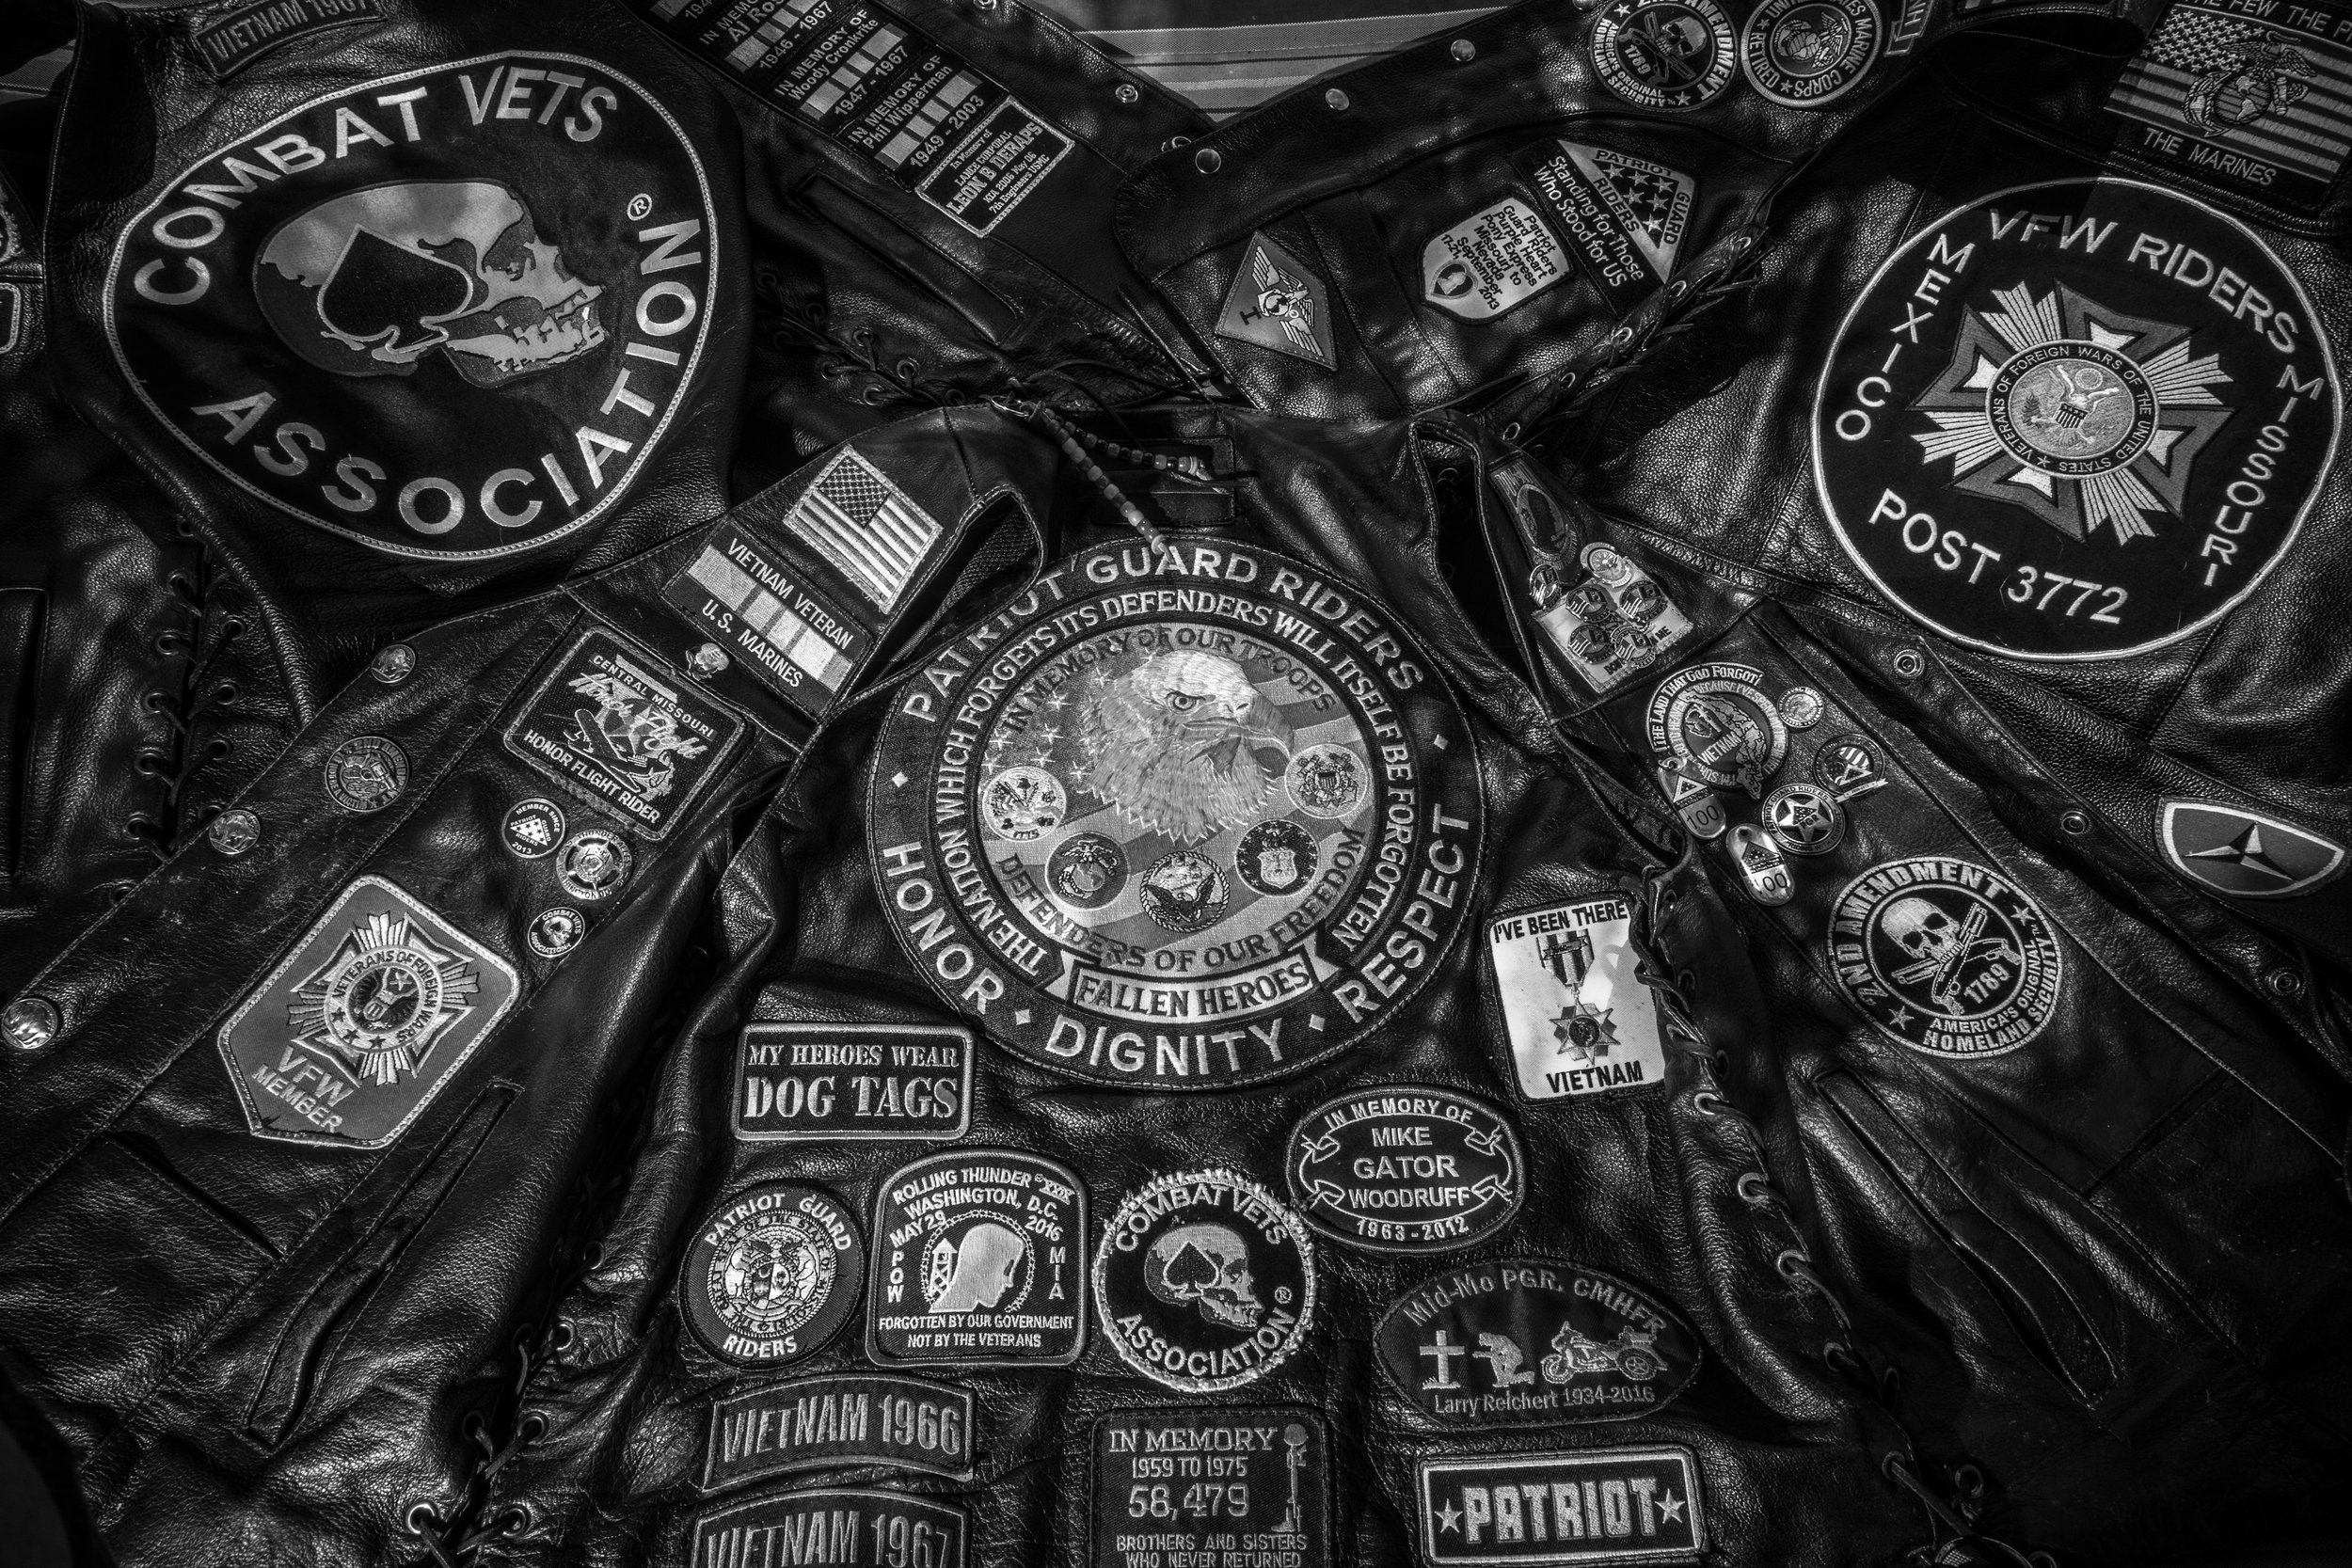  Bill Weldon's motorcycle vests as seen on Thursday, Jun. 20, 2019. Weldon belongs to several veteran focused motorcycle organizations and serves as a Senior Ride Captain for the Patriot Guard Riders. The Patriot Guard is known for motorcycle escorts